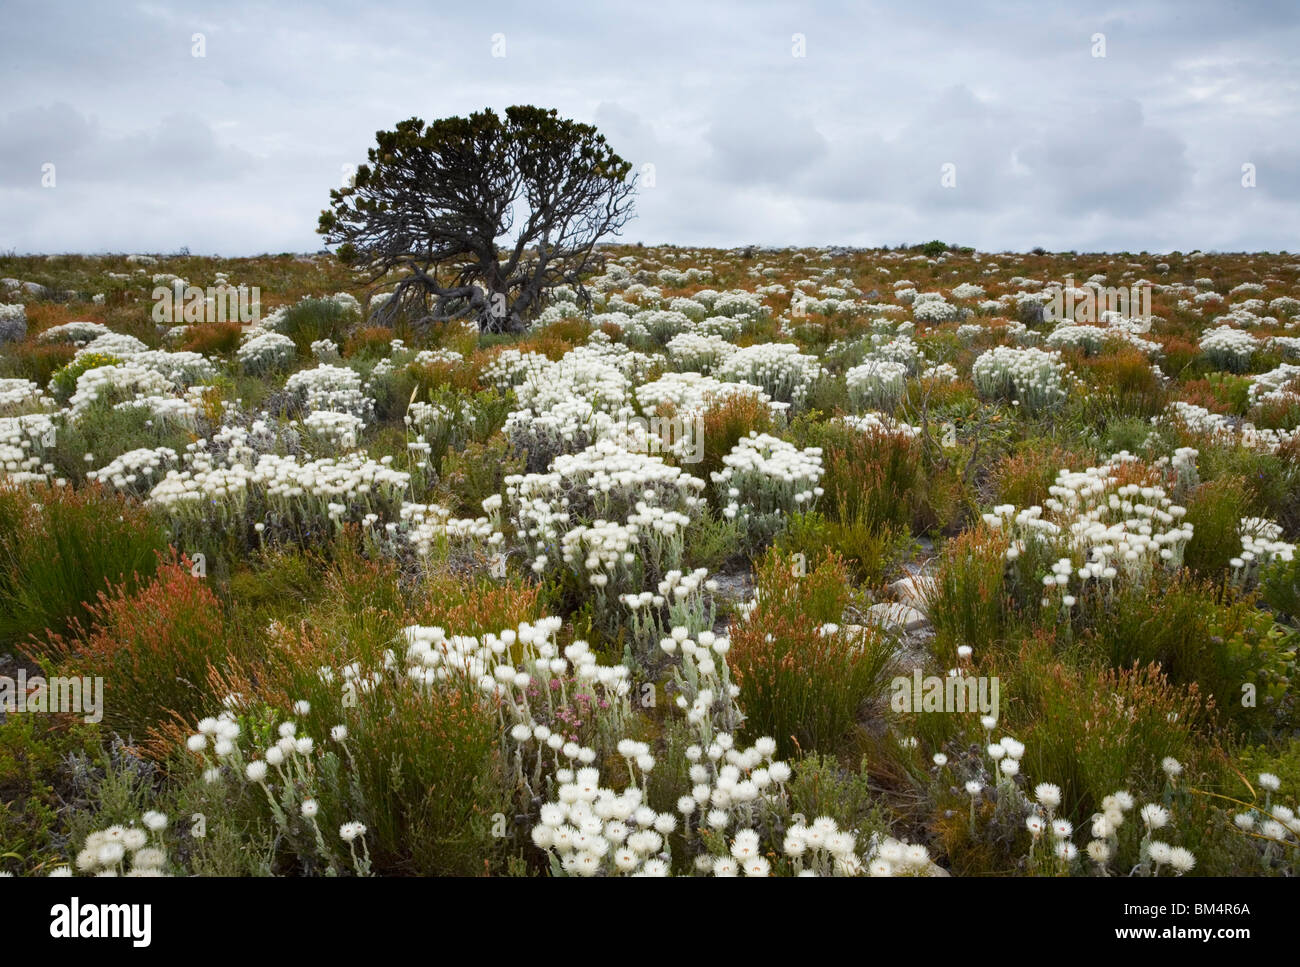 Strawflowers, Helichrysum vestitum, growing wild in the Cape of Good Hope Nature Reserve, South Africa. Stock Photo